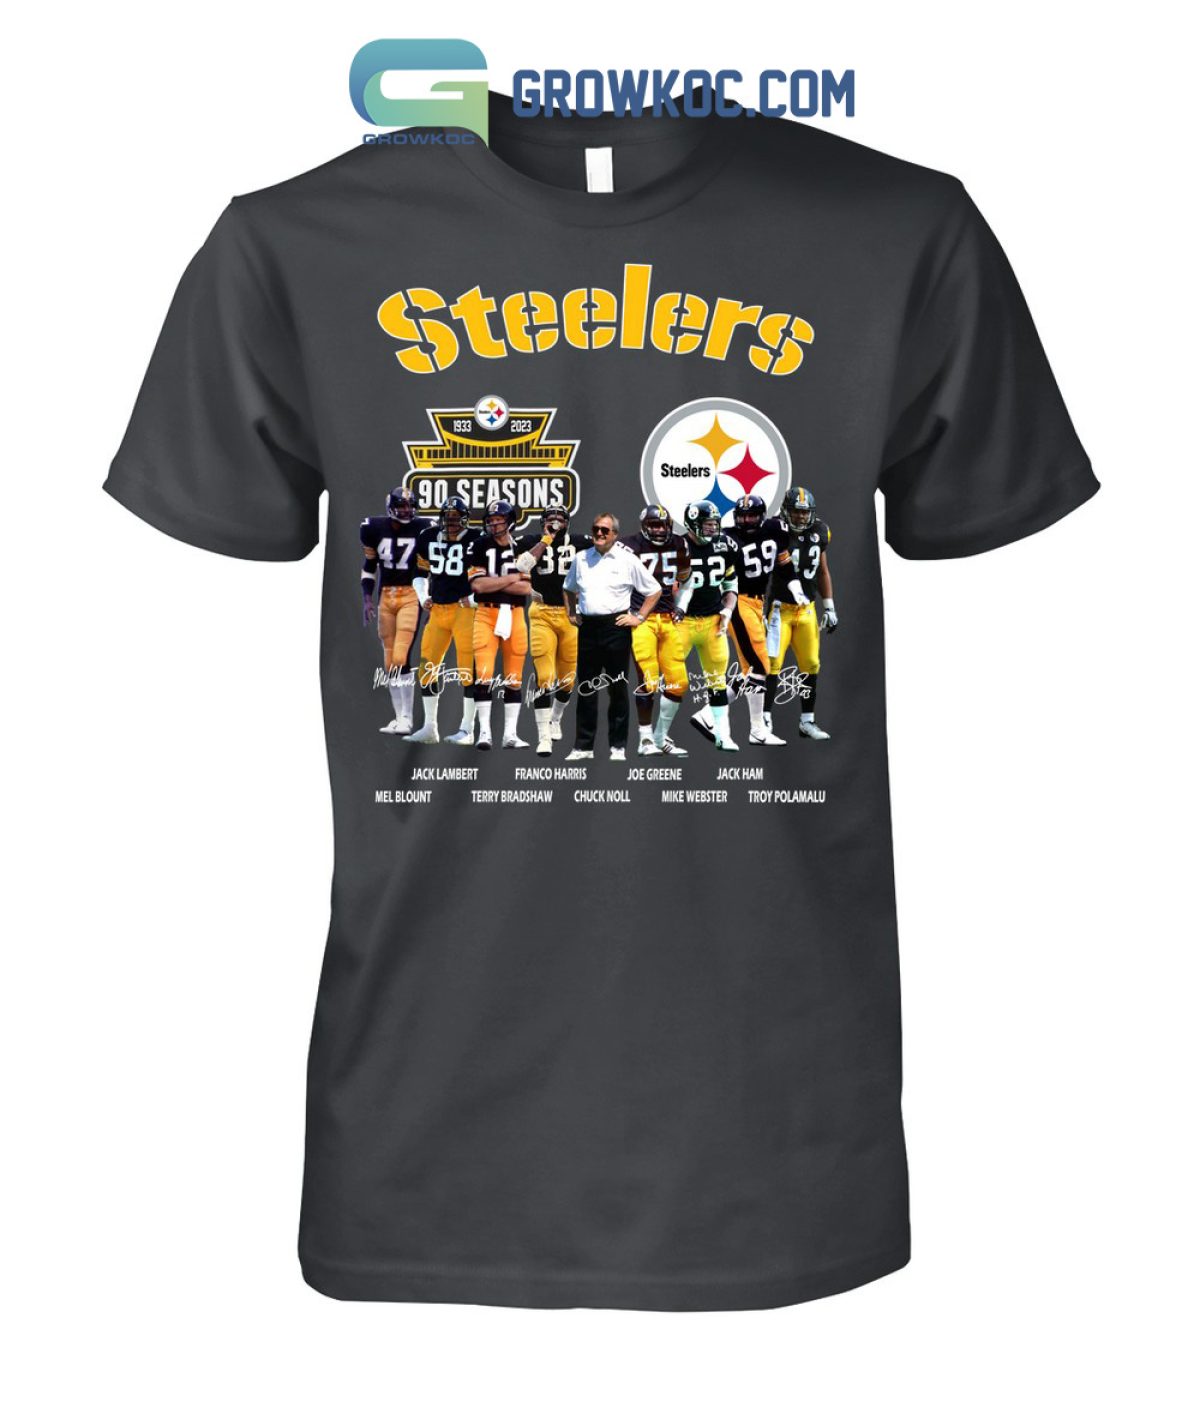 1933 pittsburgh steelers jersey